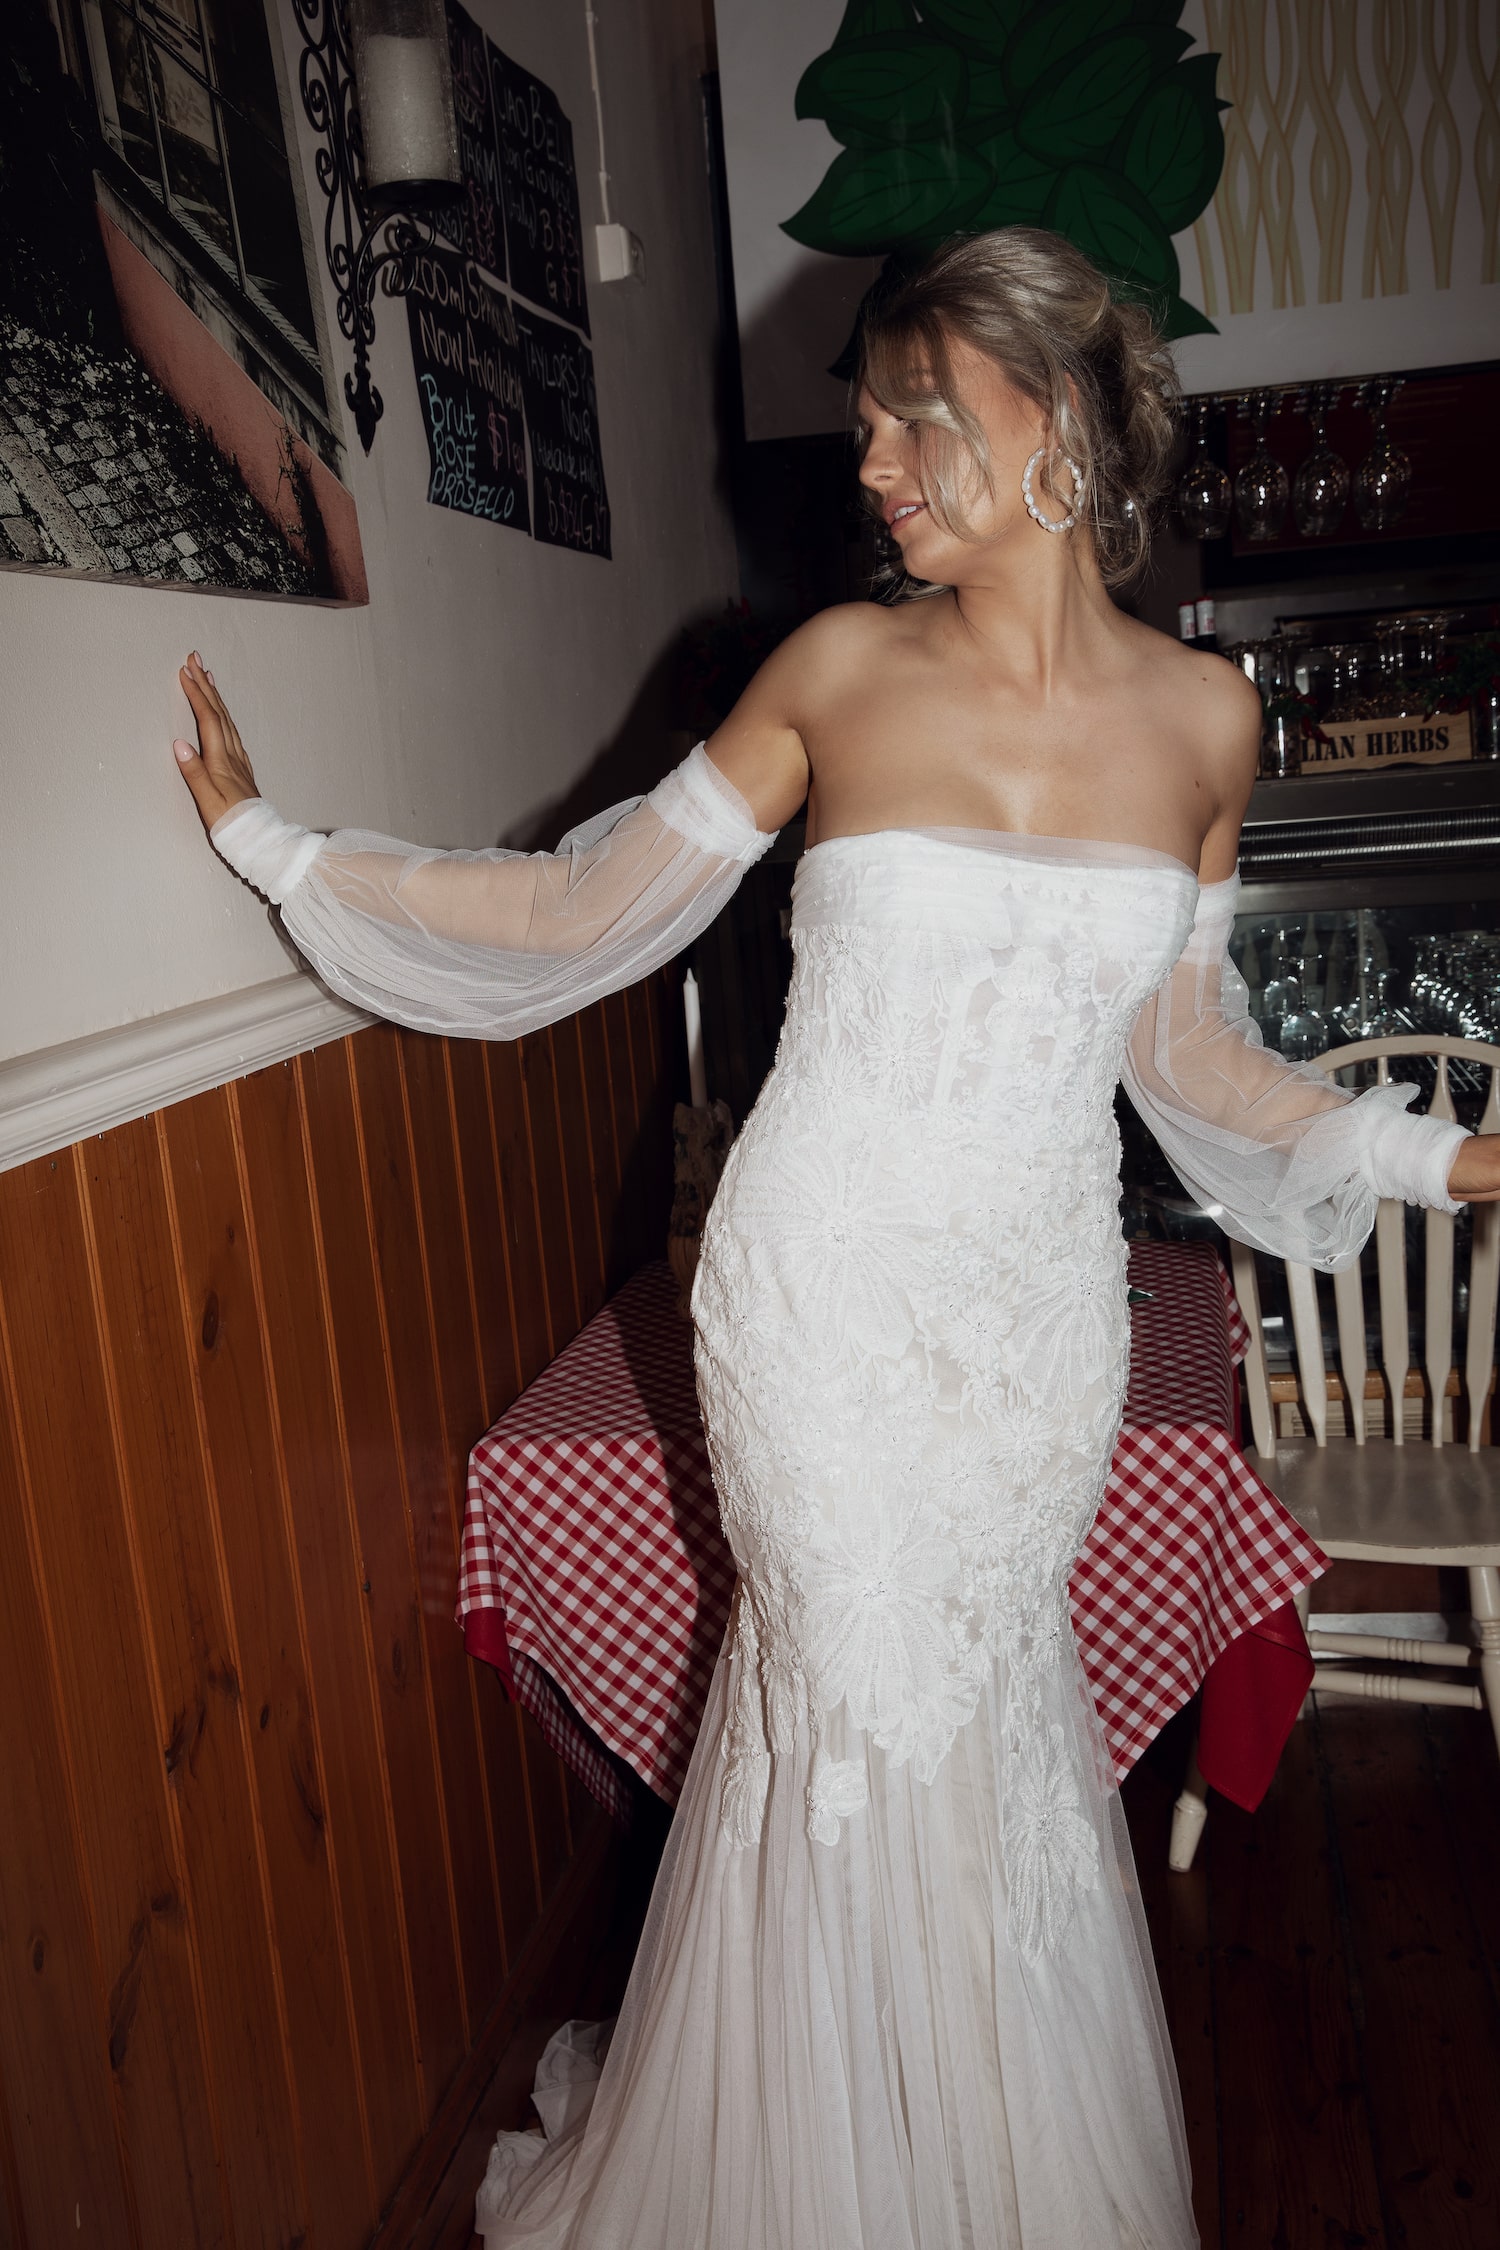 Model inside Italian cafe standing next to a small table with red and white check tablecloth leaning one hand against wall. Wearing the Verona gown.